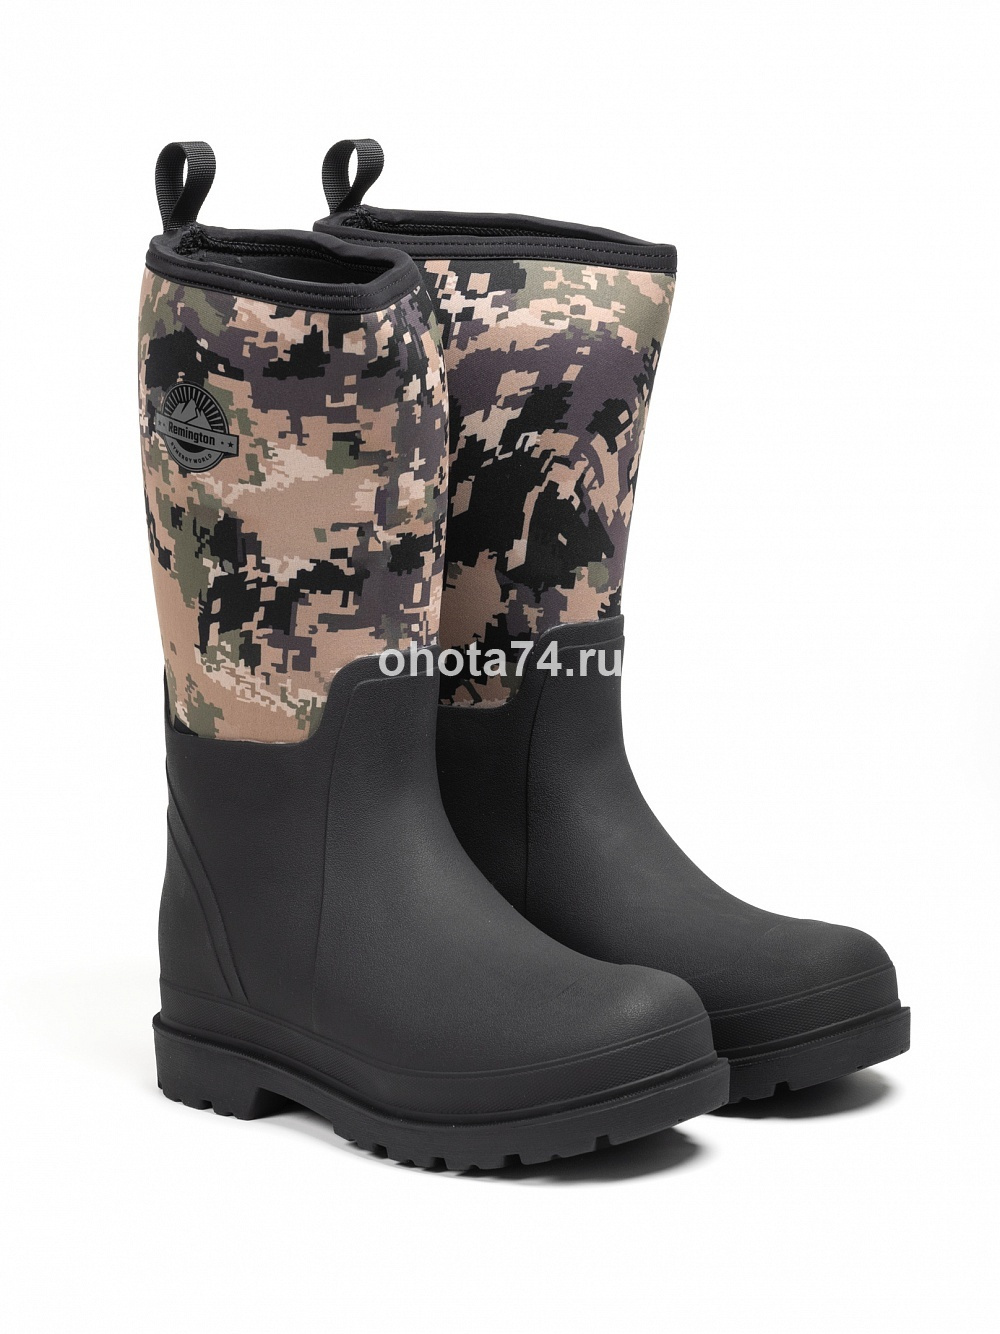   Remington Rubber Boots Camo Green Forest .44/RF2605-997   " "